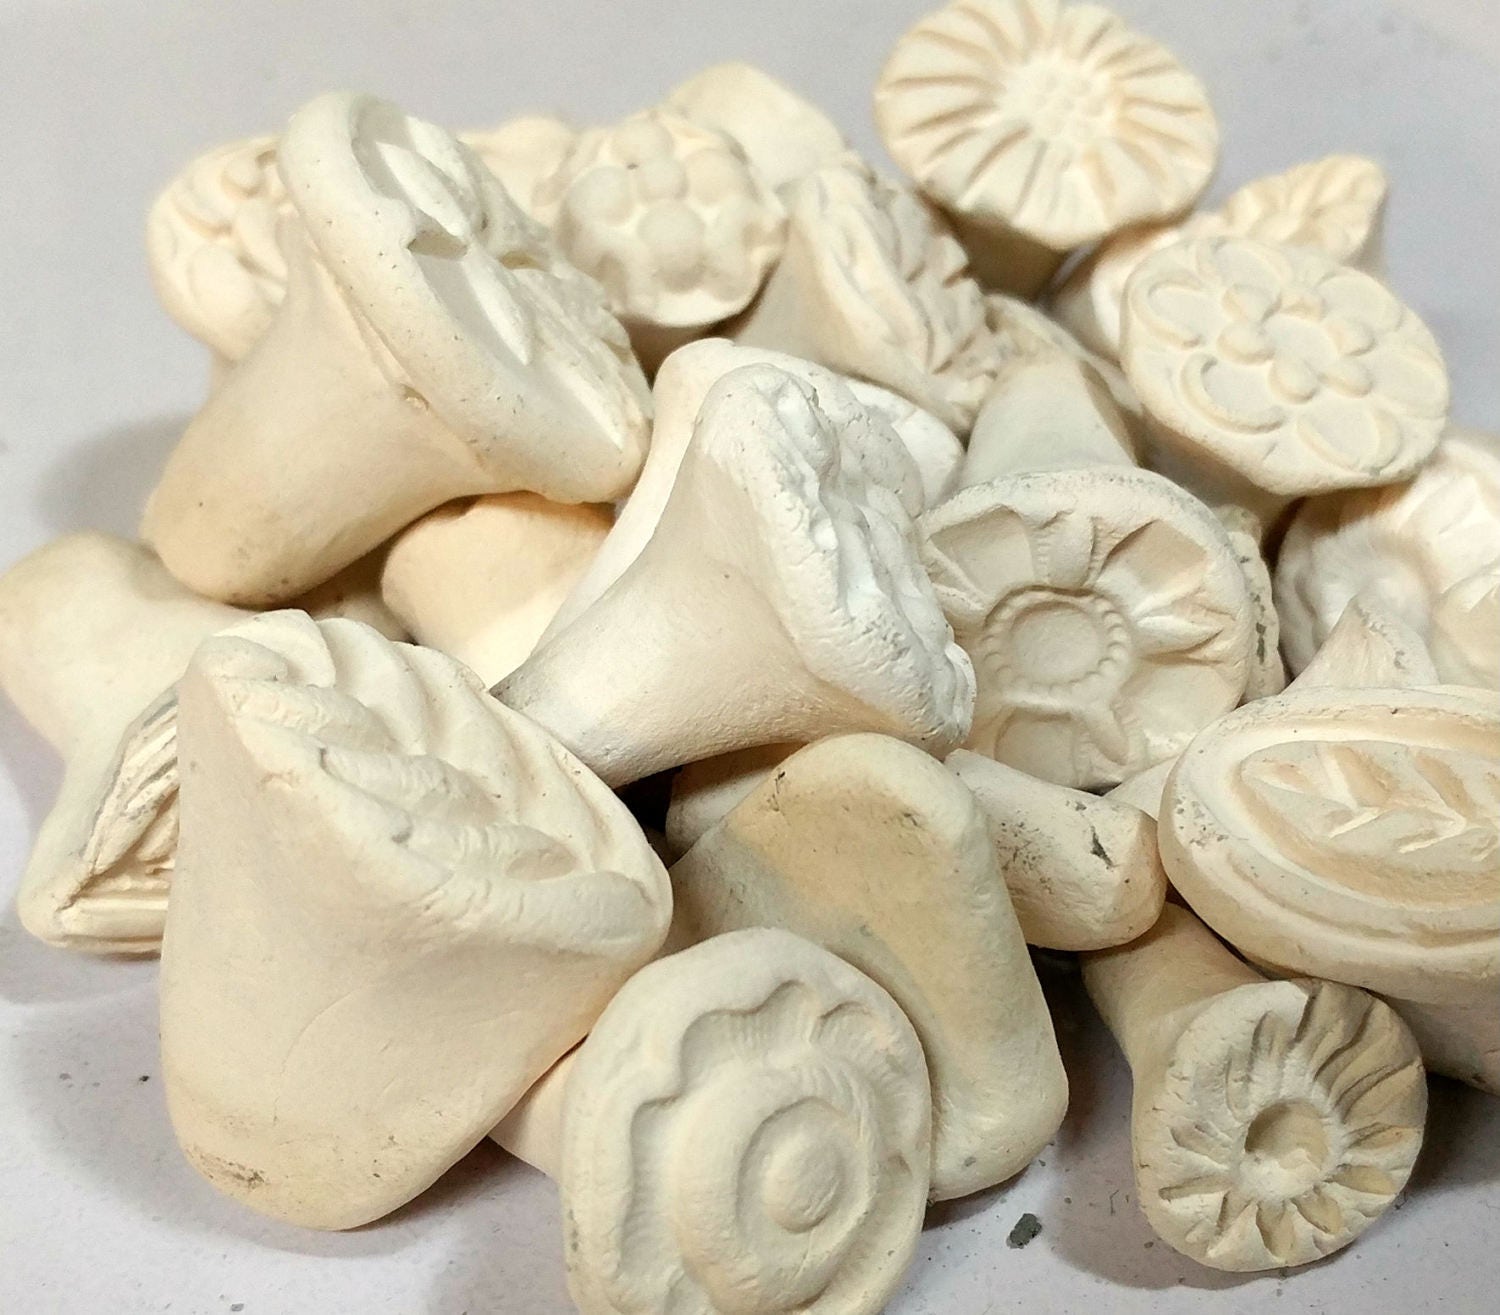 Clay Stamps for Pottery, Fimo, PMC, Fondant and More Clay Tools